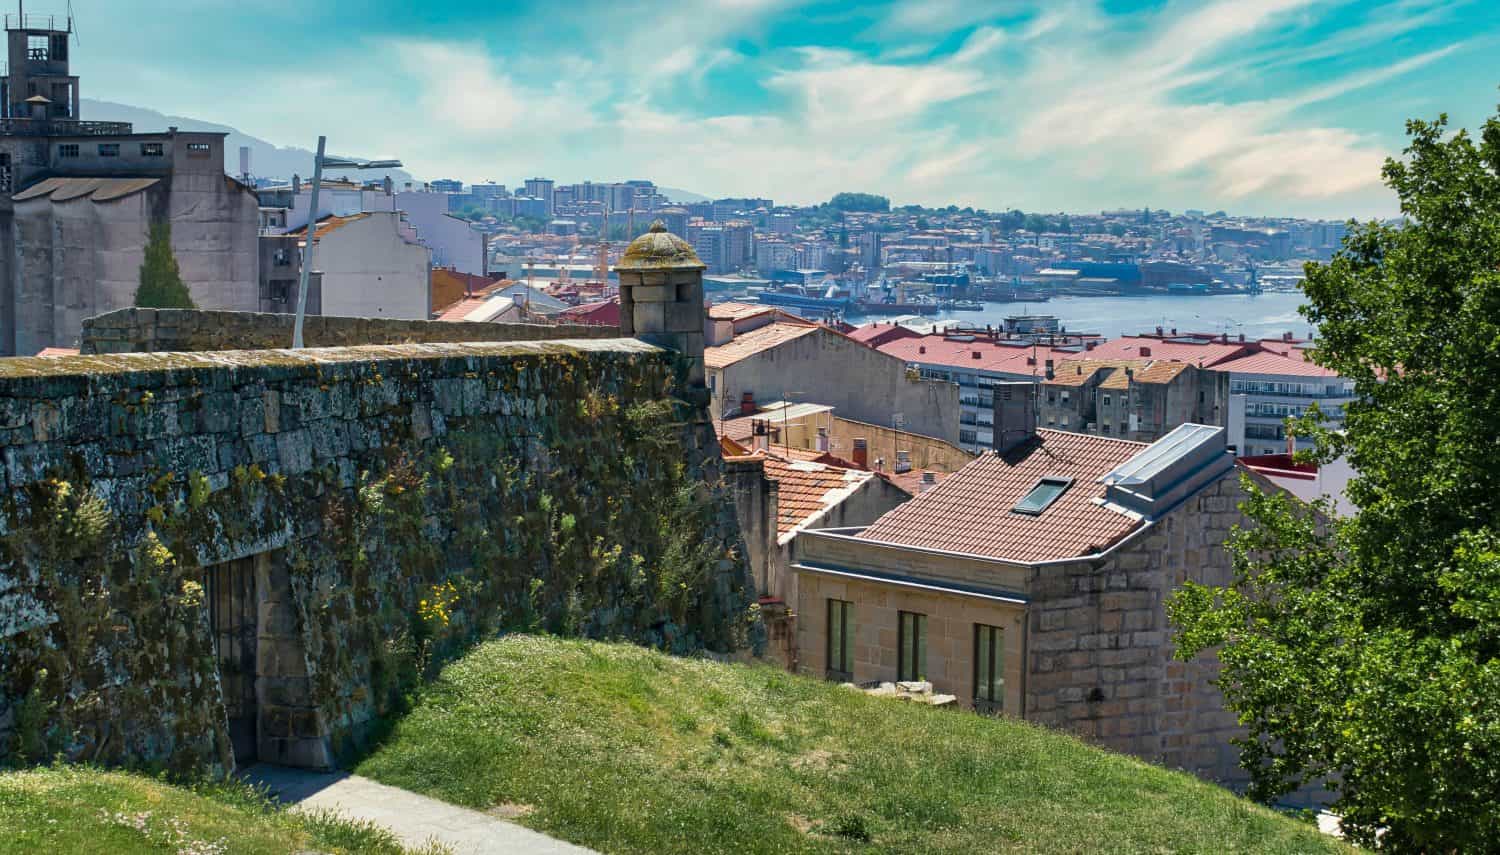 A guard post in the old fortress of San Sebastian above the city of Vigo, Spain